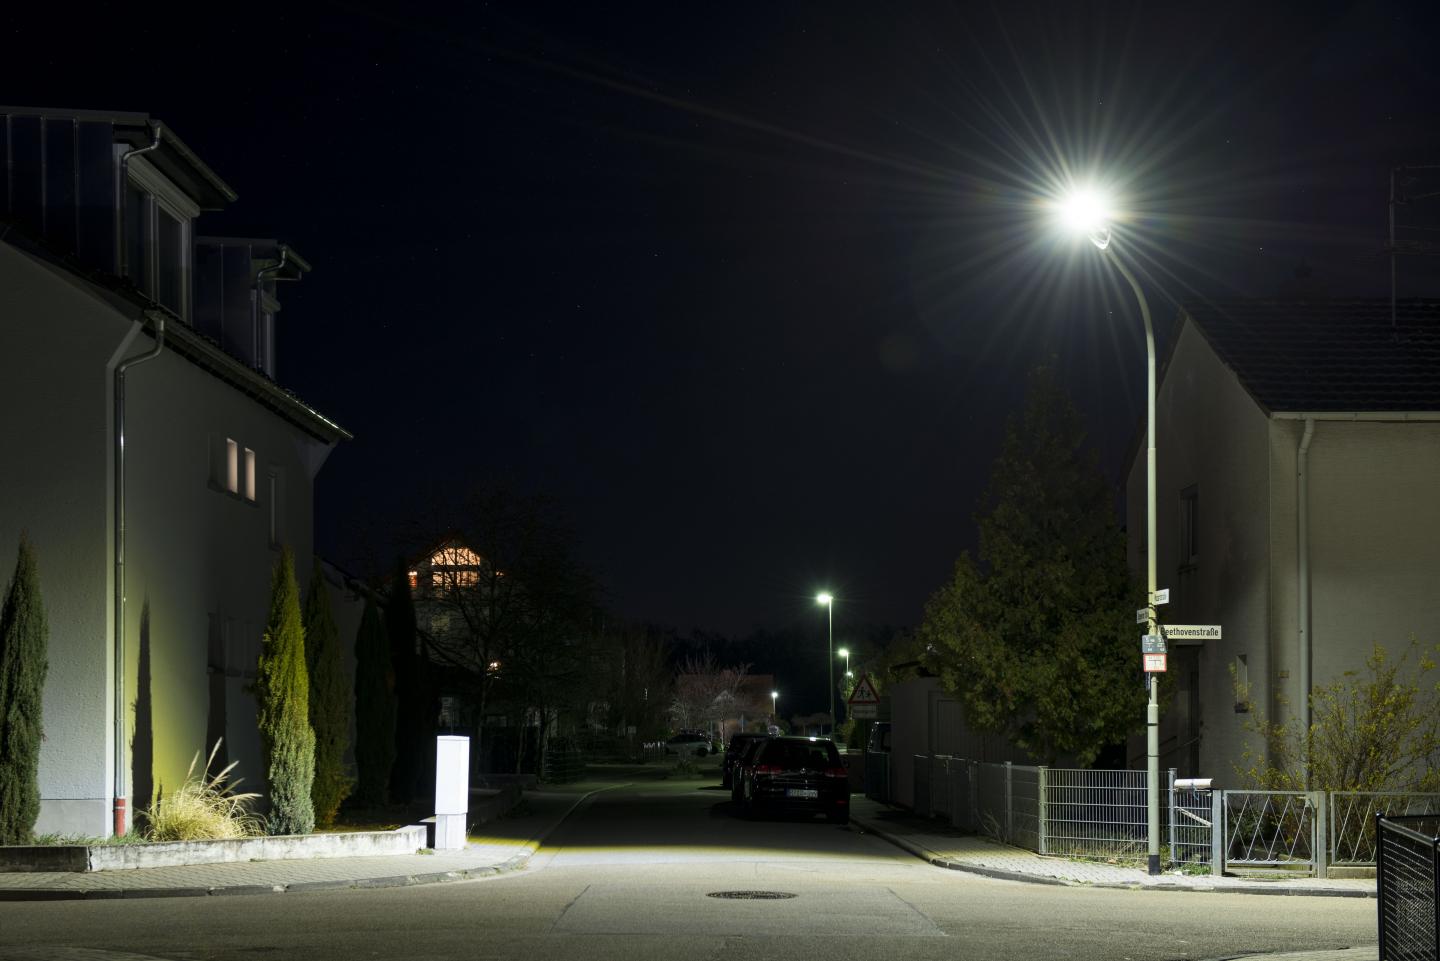 New Street Lights Tested in Maxdorf Consume Less Power and Are Much Brighter